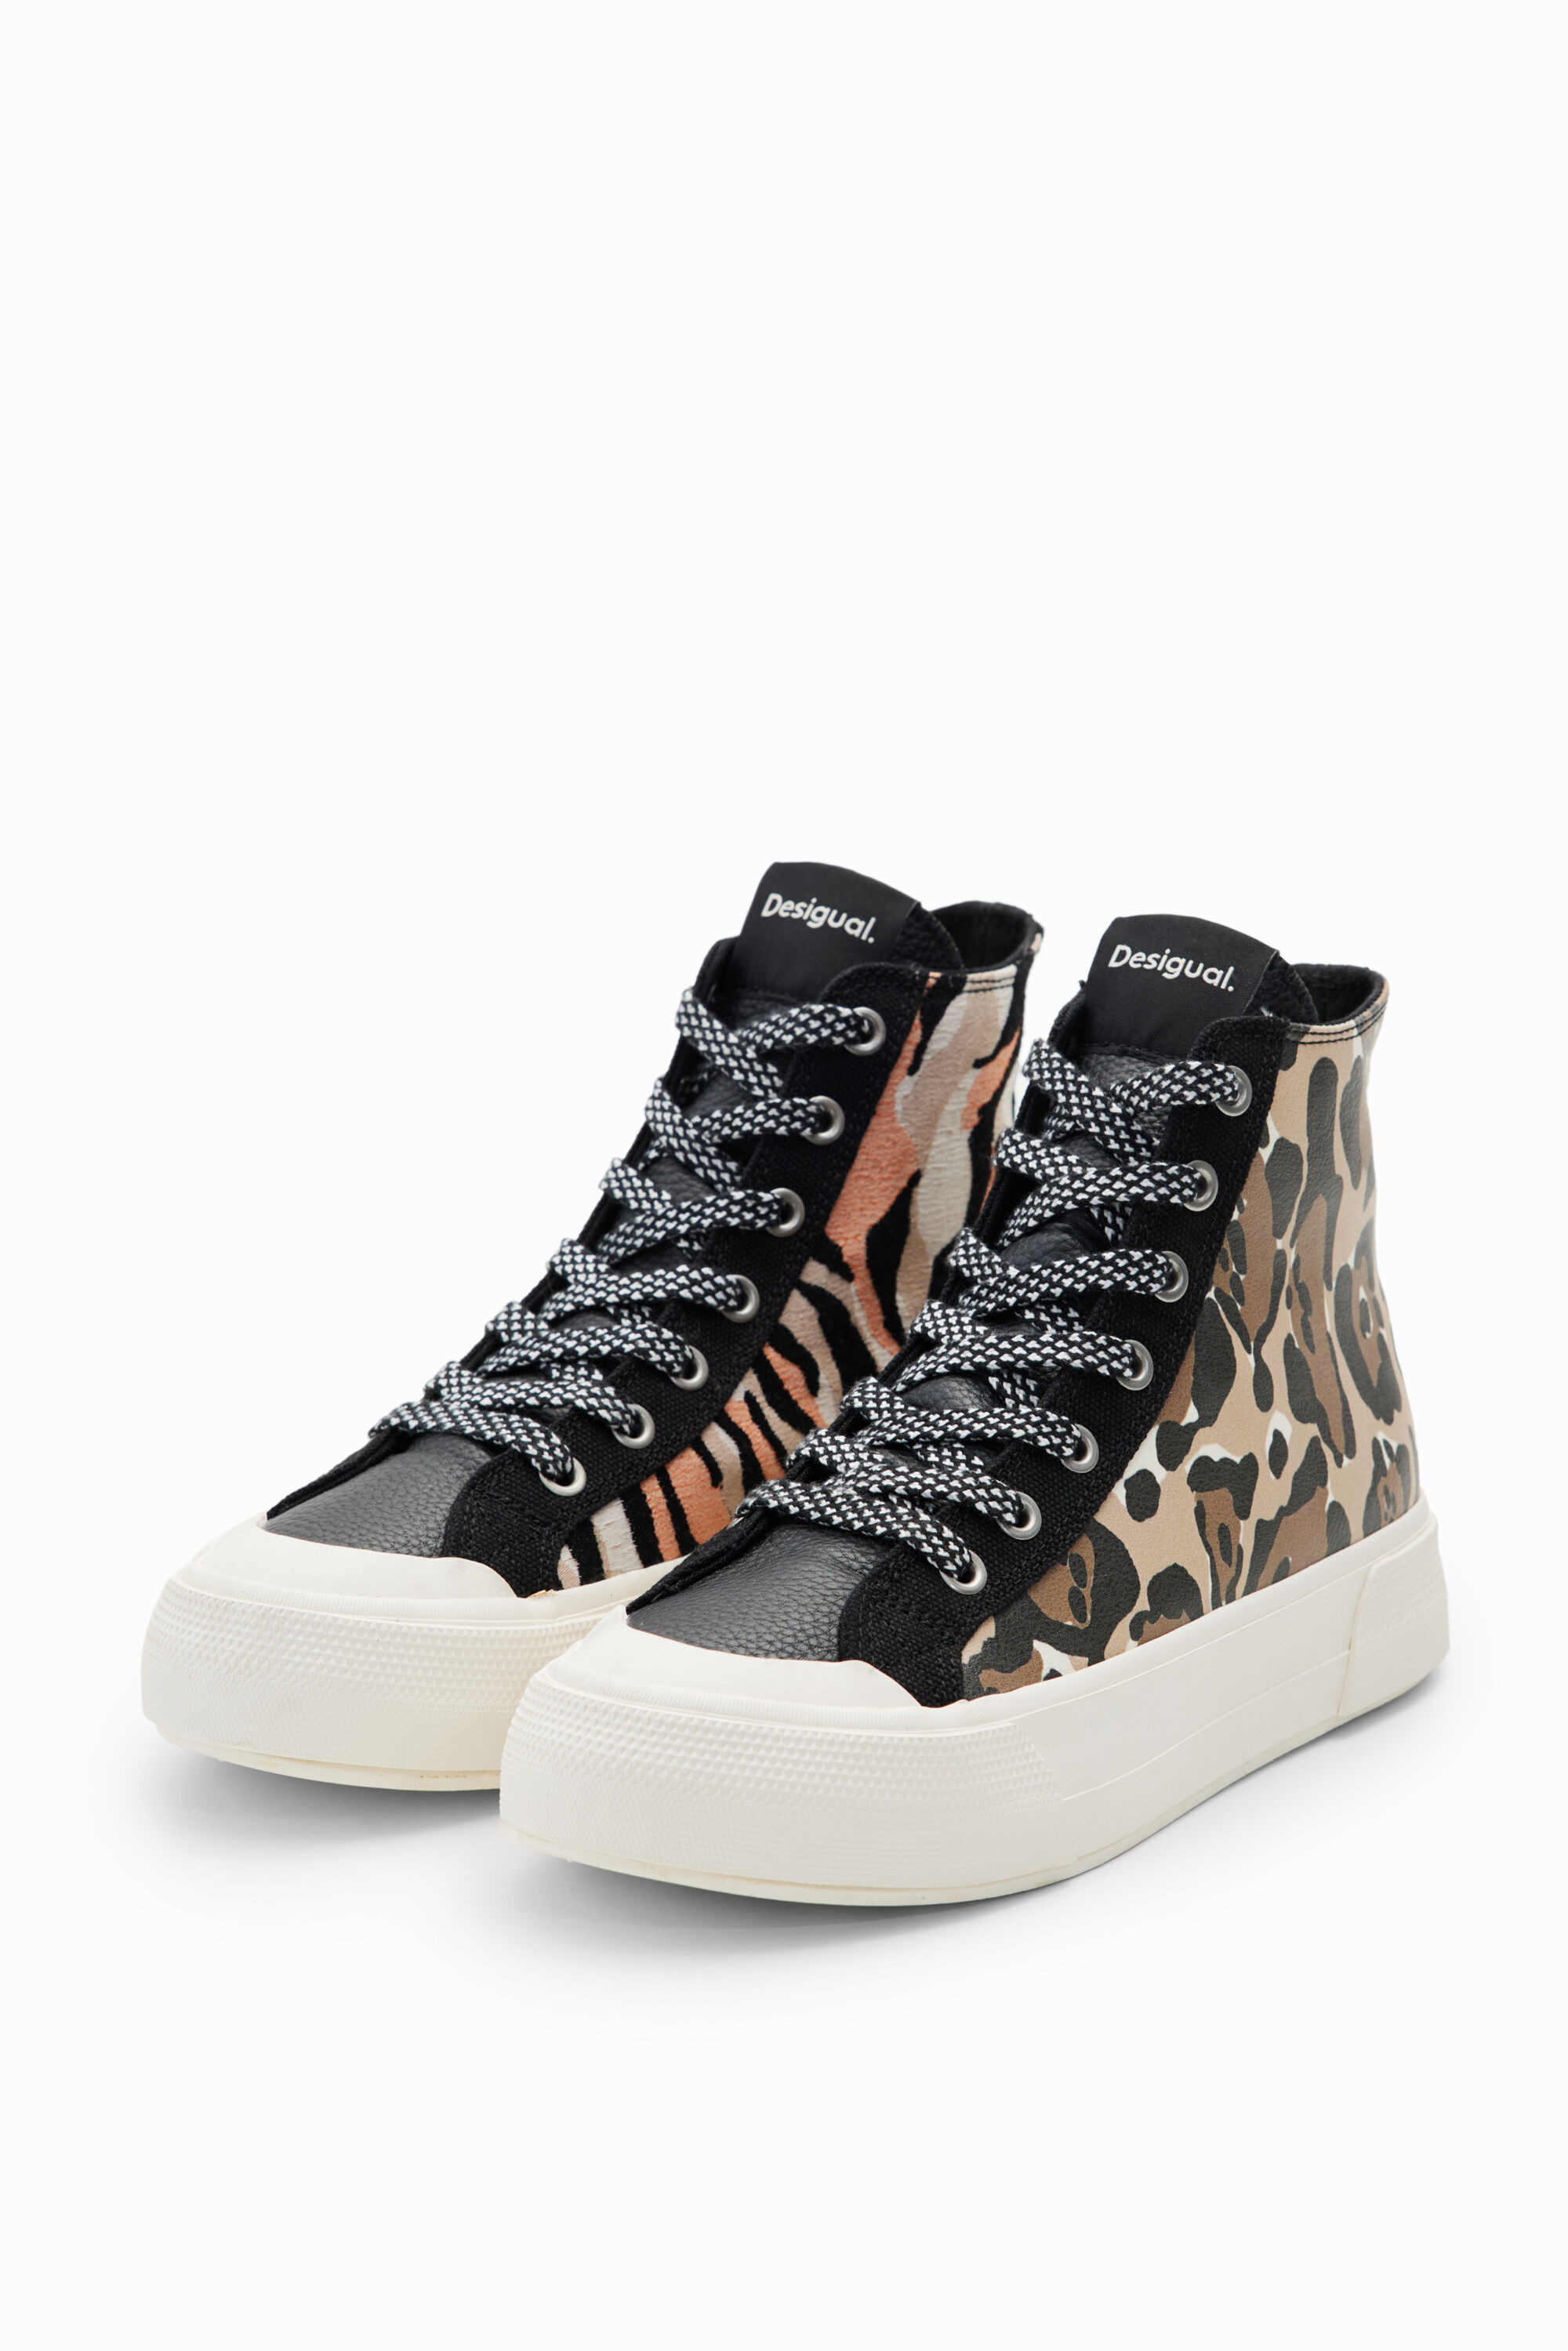 SERGIO ROSSI ANIMAL PRINT SNEAKERS Archives - The Peacock Magazine